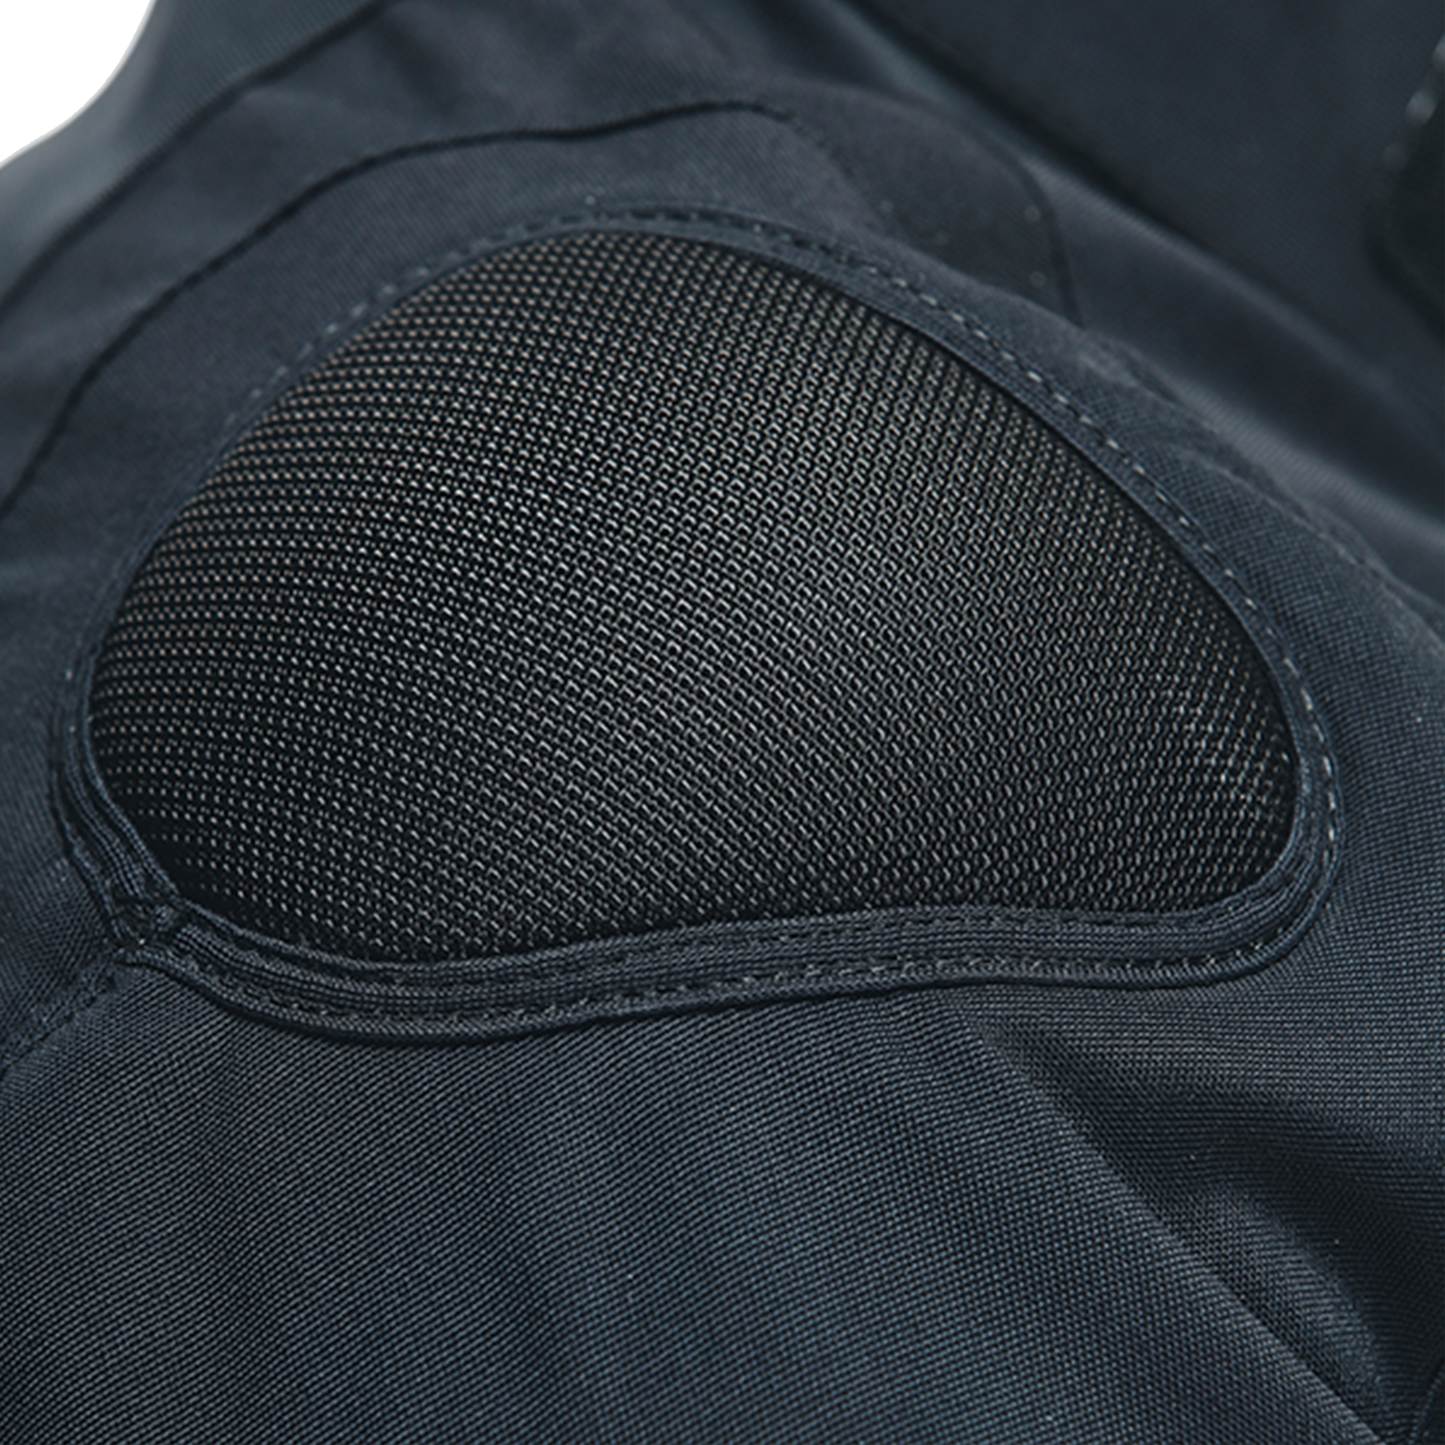 Dainese Carve Master 3 Gore-Tex Jacket - 06C